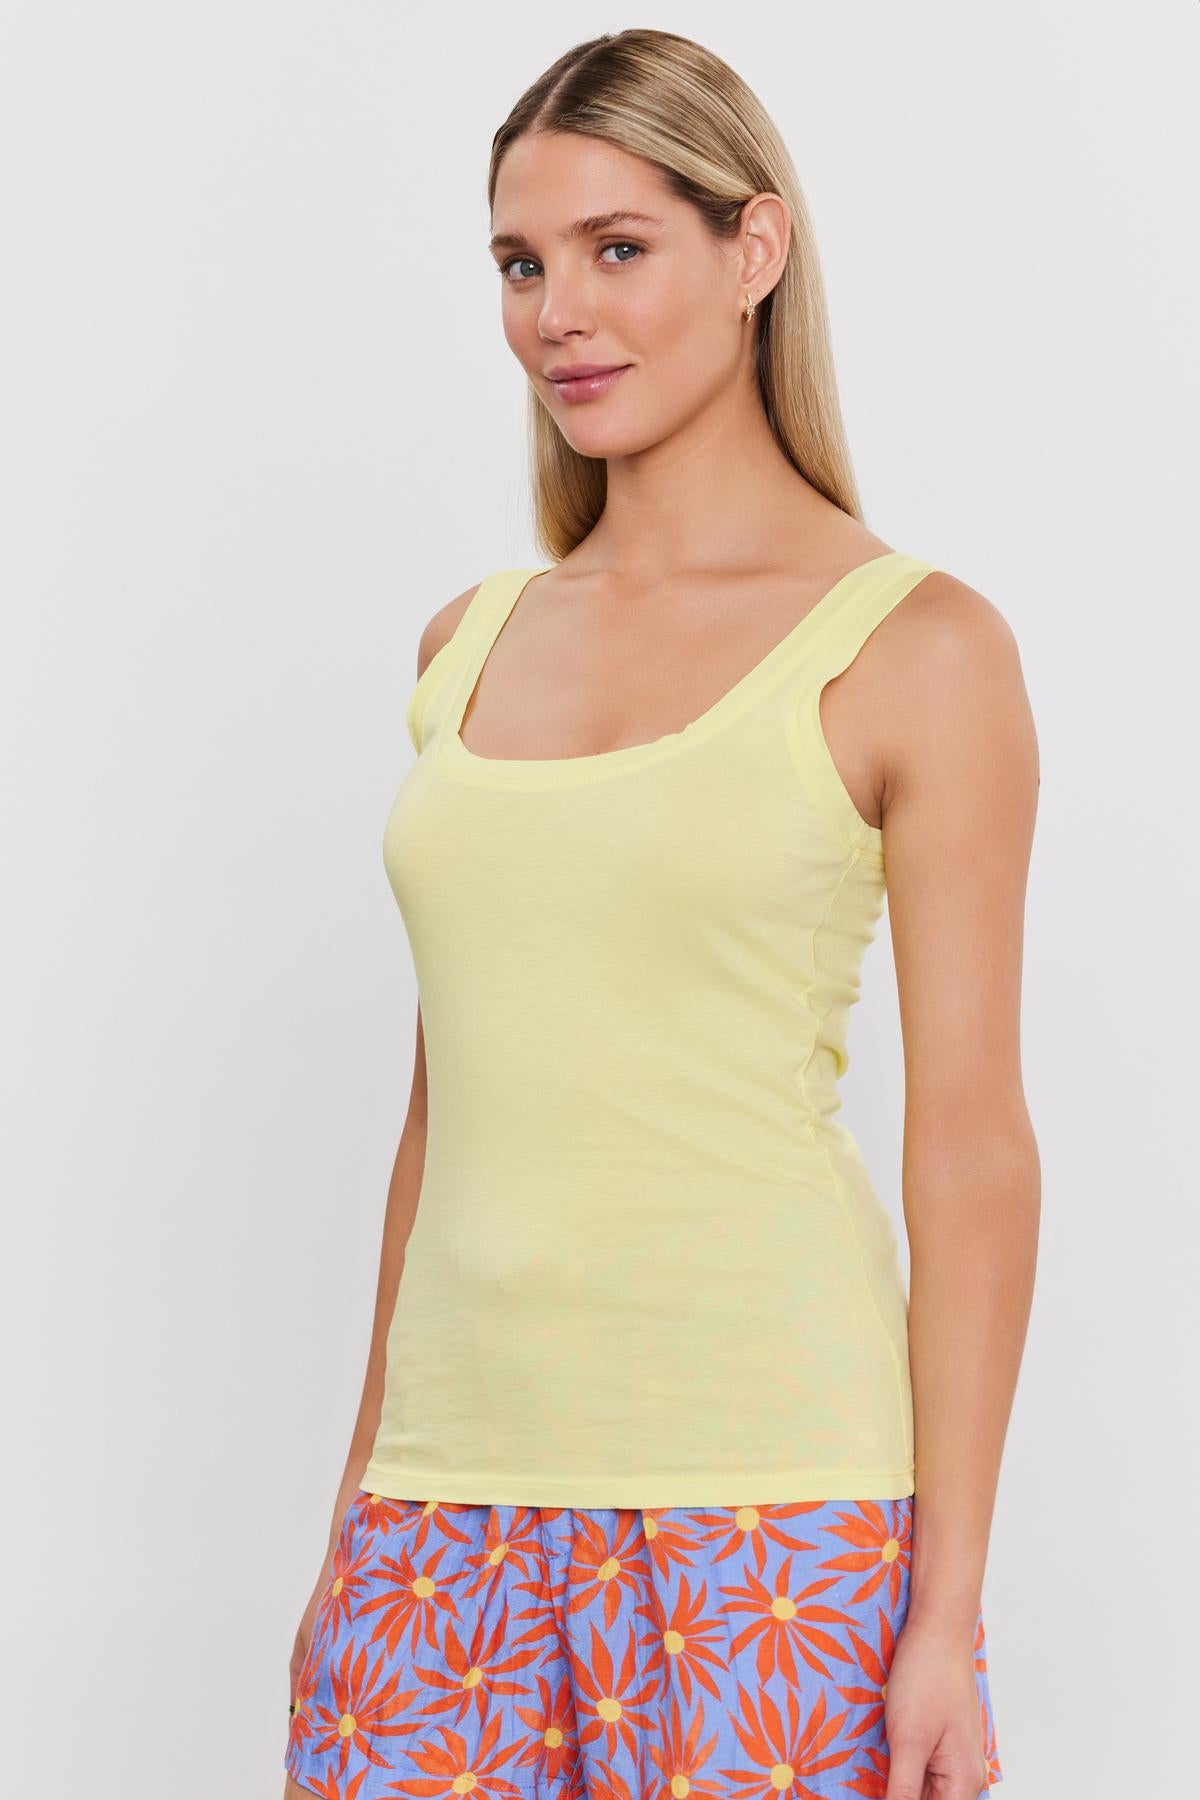 A woman wearing a yellow Velvet by Graham & Spencer MOSSY GAUZY WHISPER FITTED TANK and colorful floral shorts, standing against a white background, looking at the camera.-36910237548737